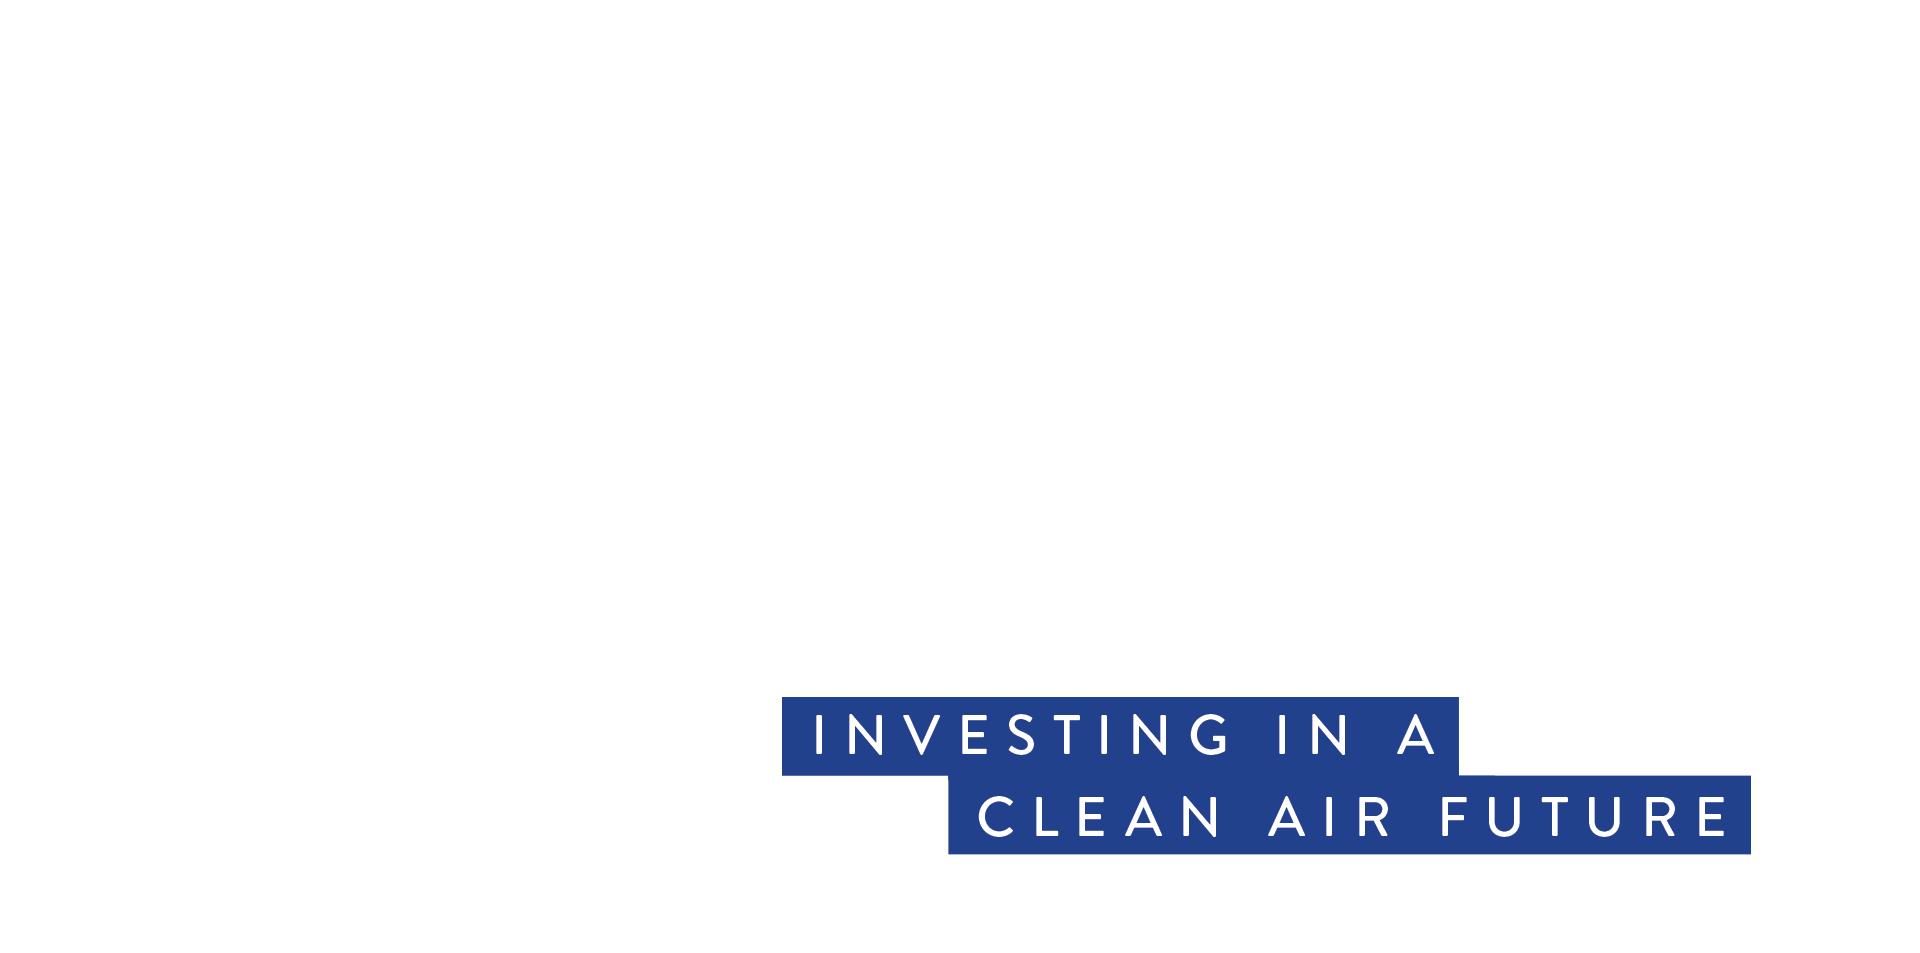 image-title-investing_in_a_clean_air_future